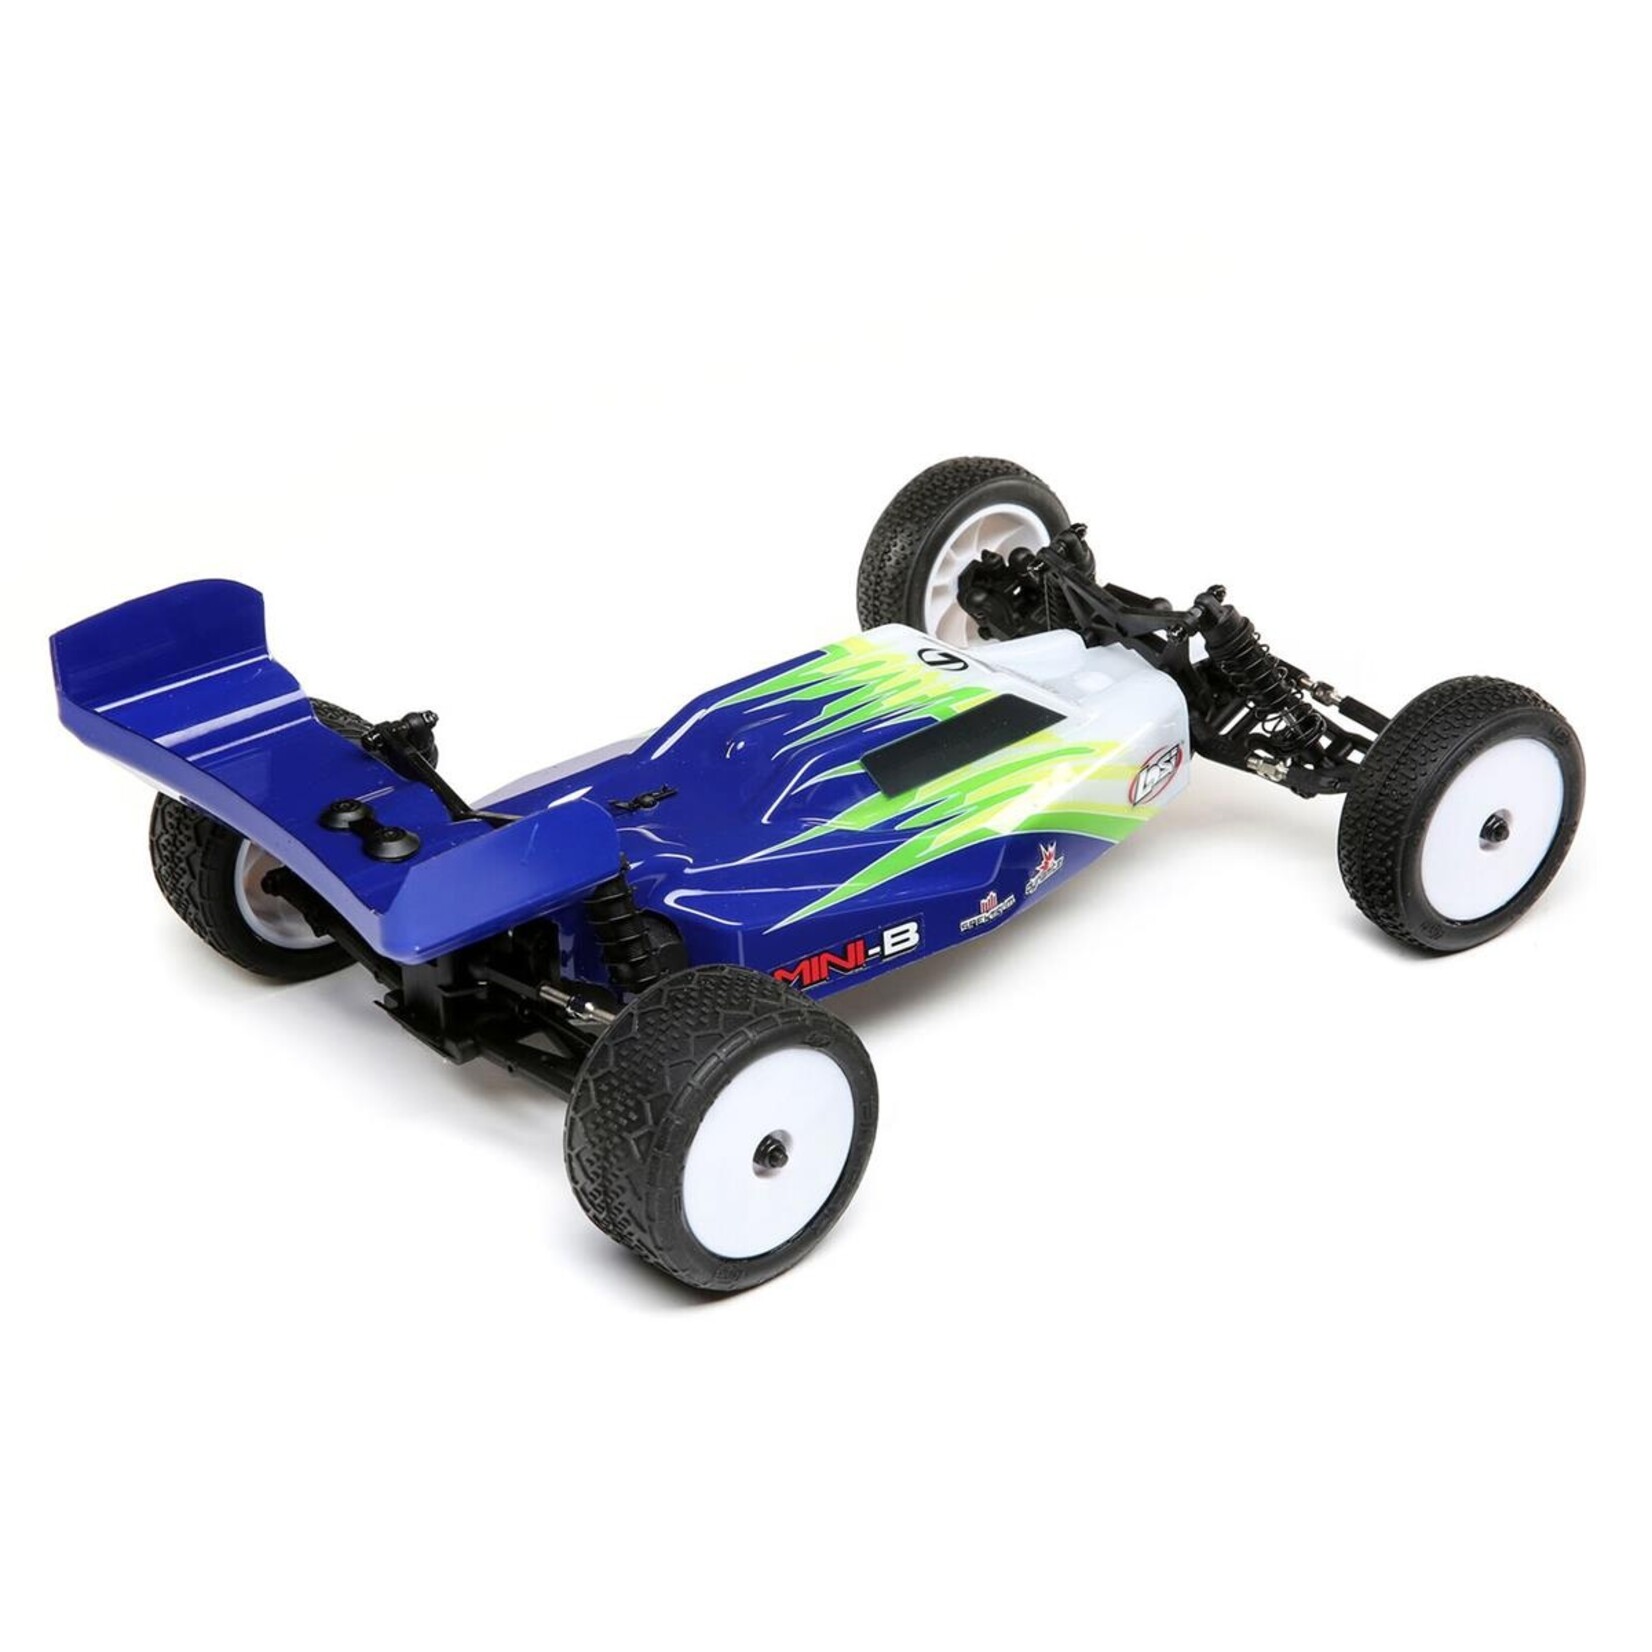 Losi Losi Mini-B 1/16 RTR 2WD Buggy (Blue) w/2.4GHz Radio, Battery & Charger #LOS01016T1